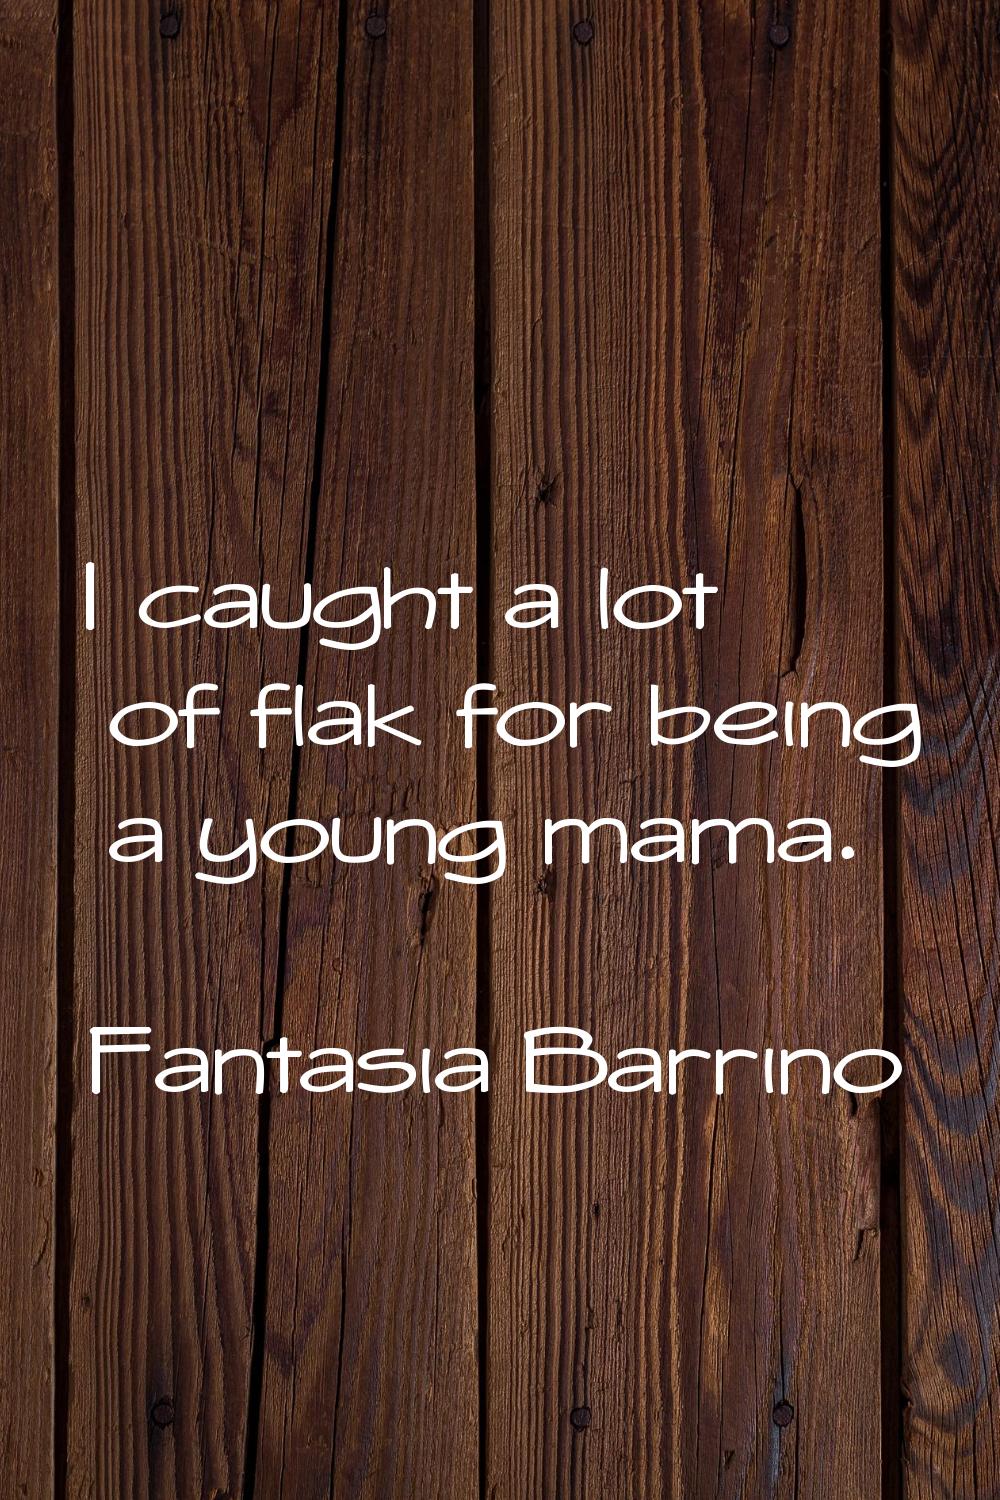 I caught a lot of flak for being a young mama.